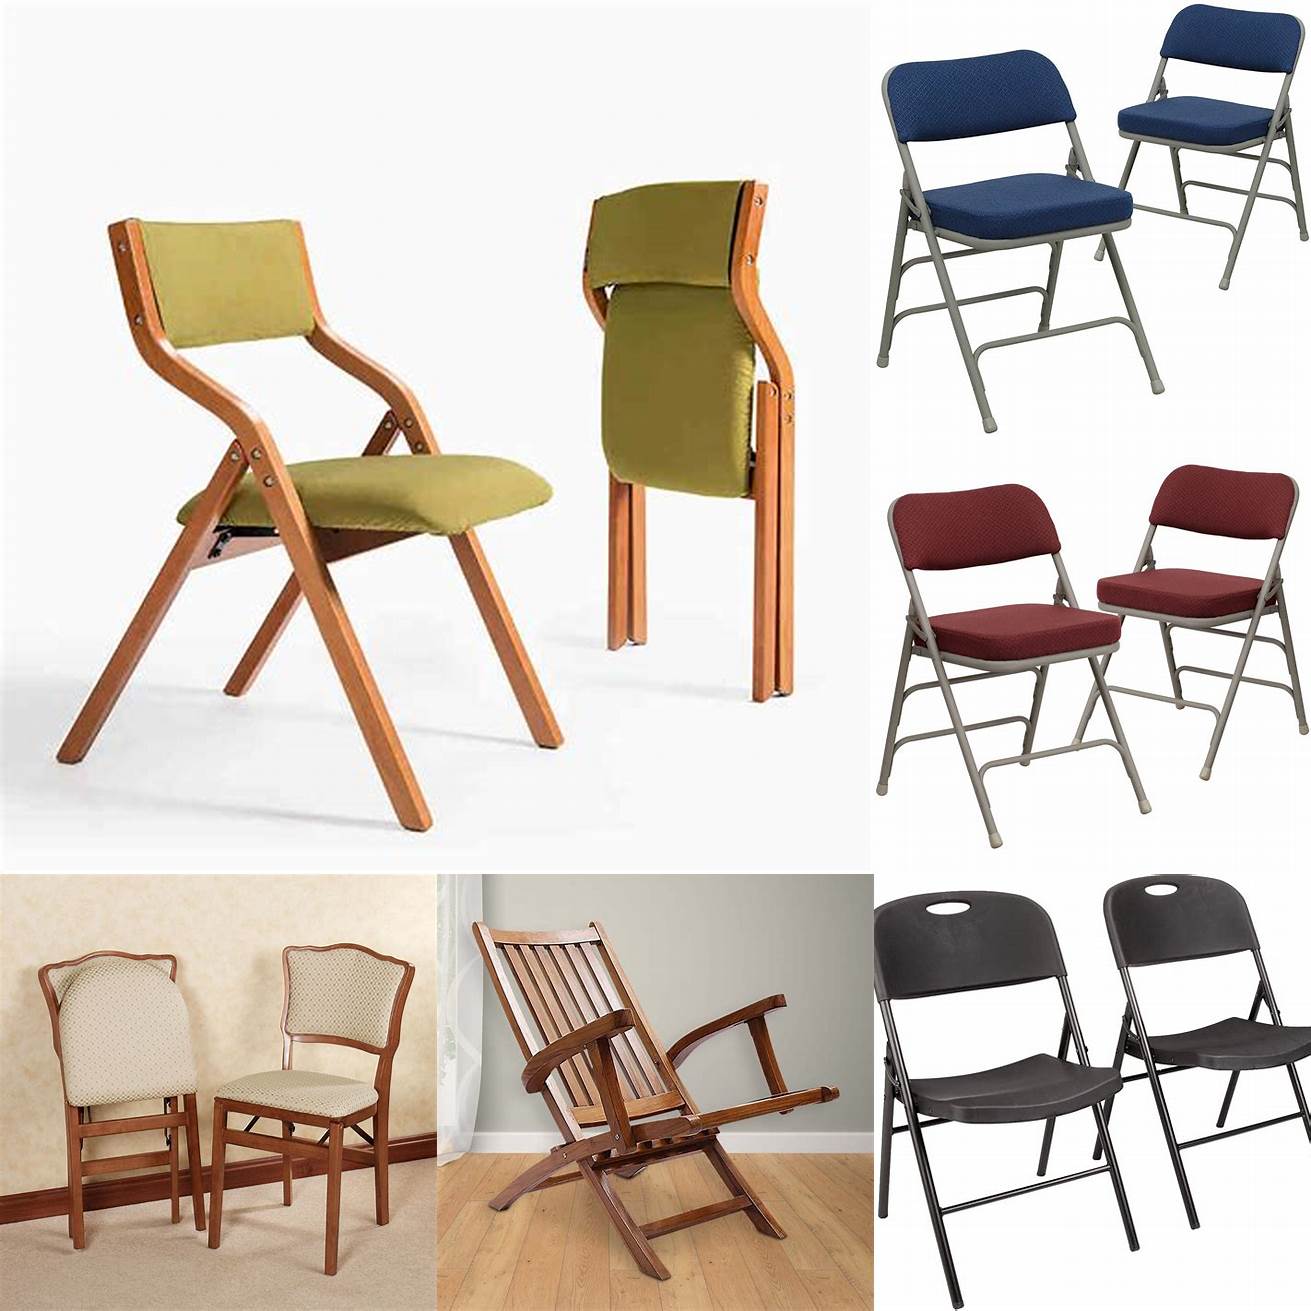 Fold the chairs